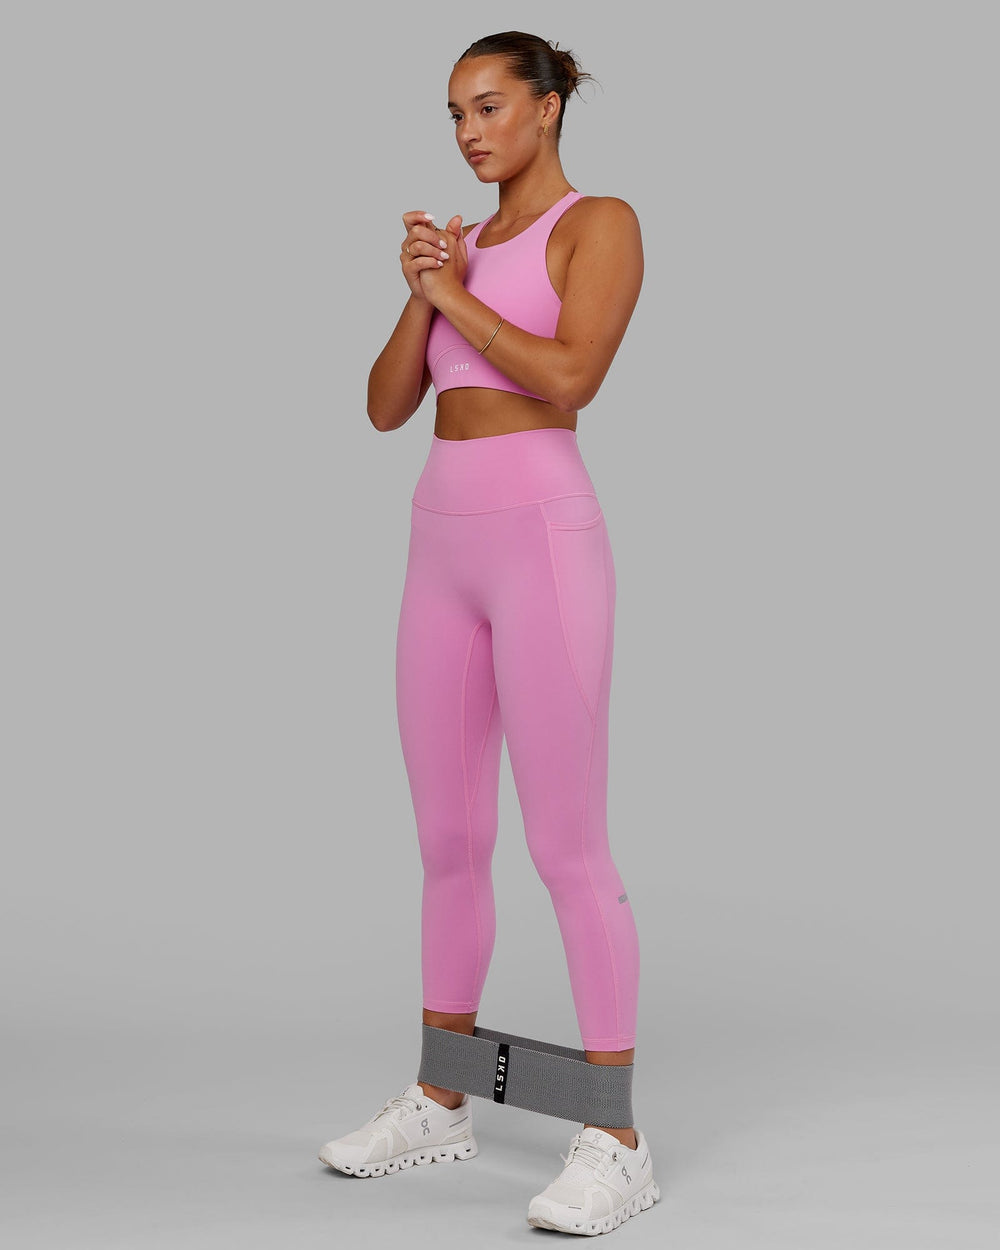 Woman Wearing Fusion 7/8 Length Tight - Spark Pink